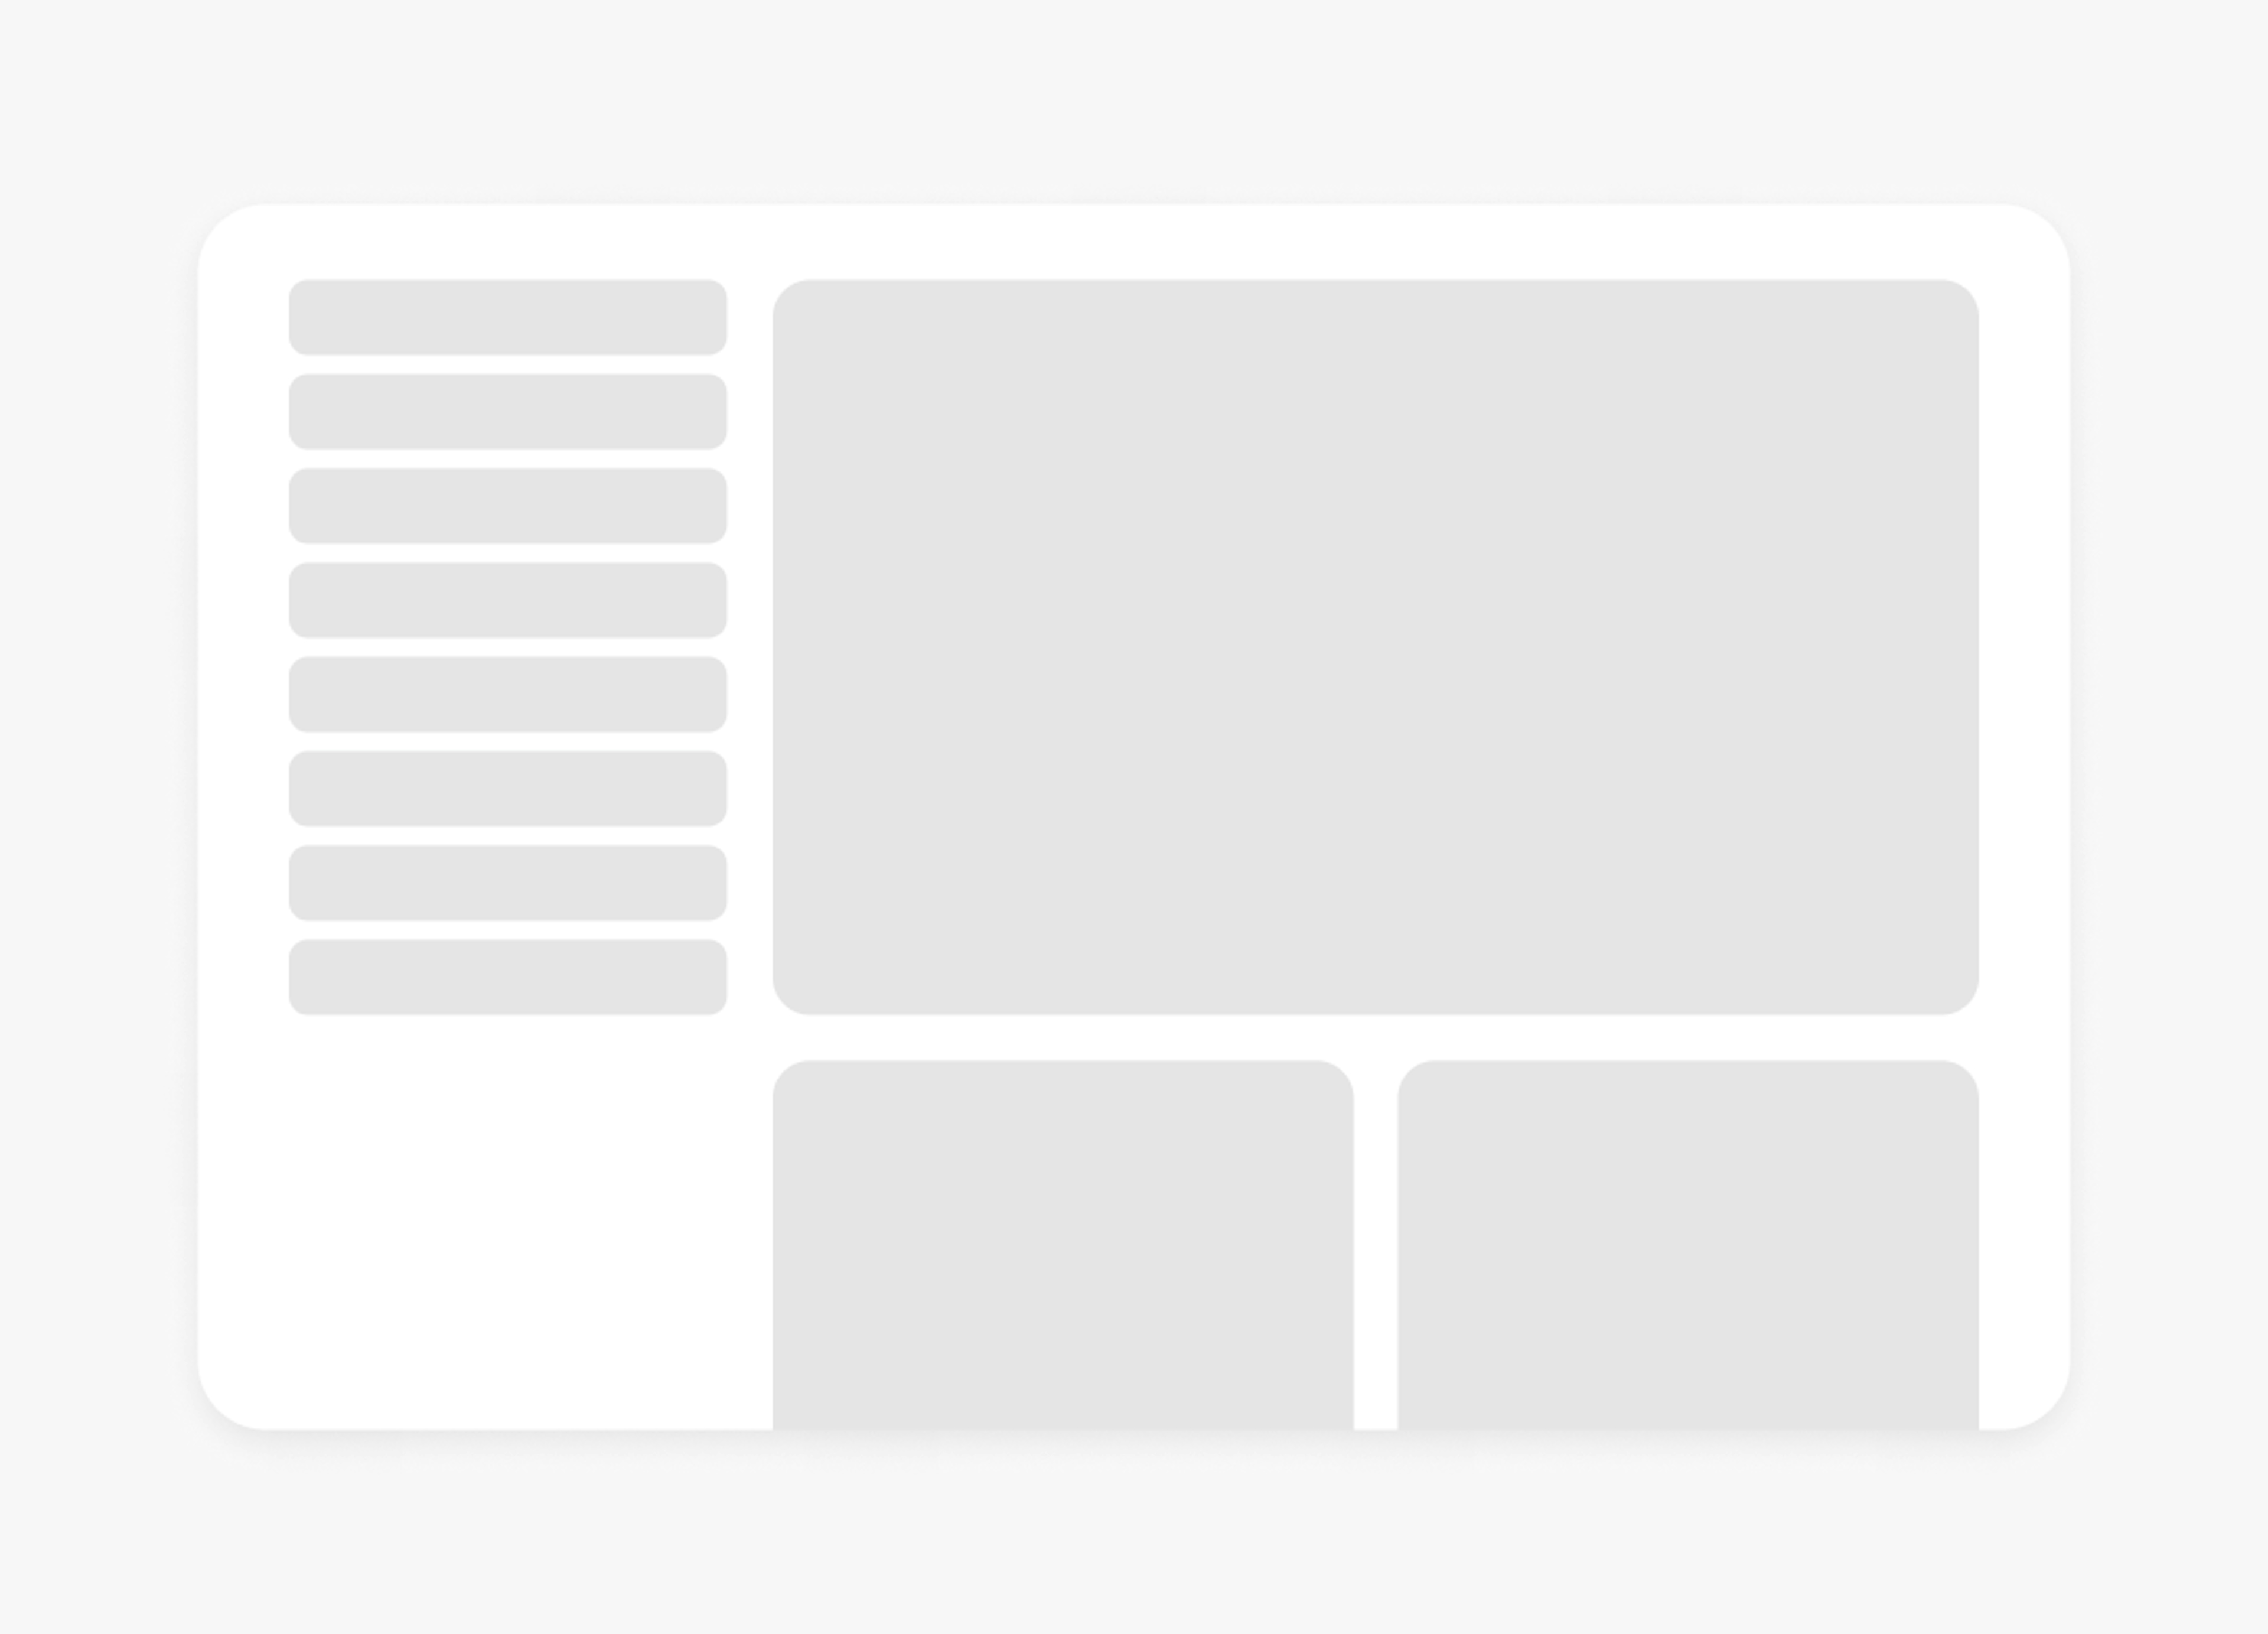 A wireframe of a UI page design.